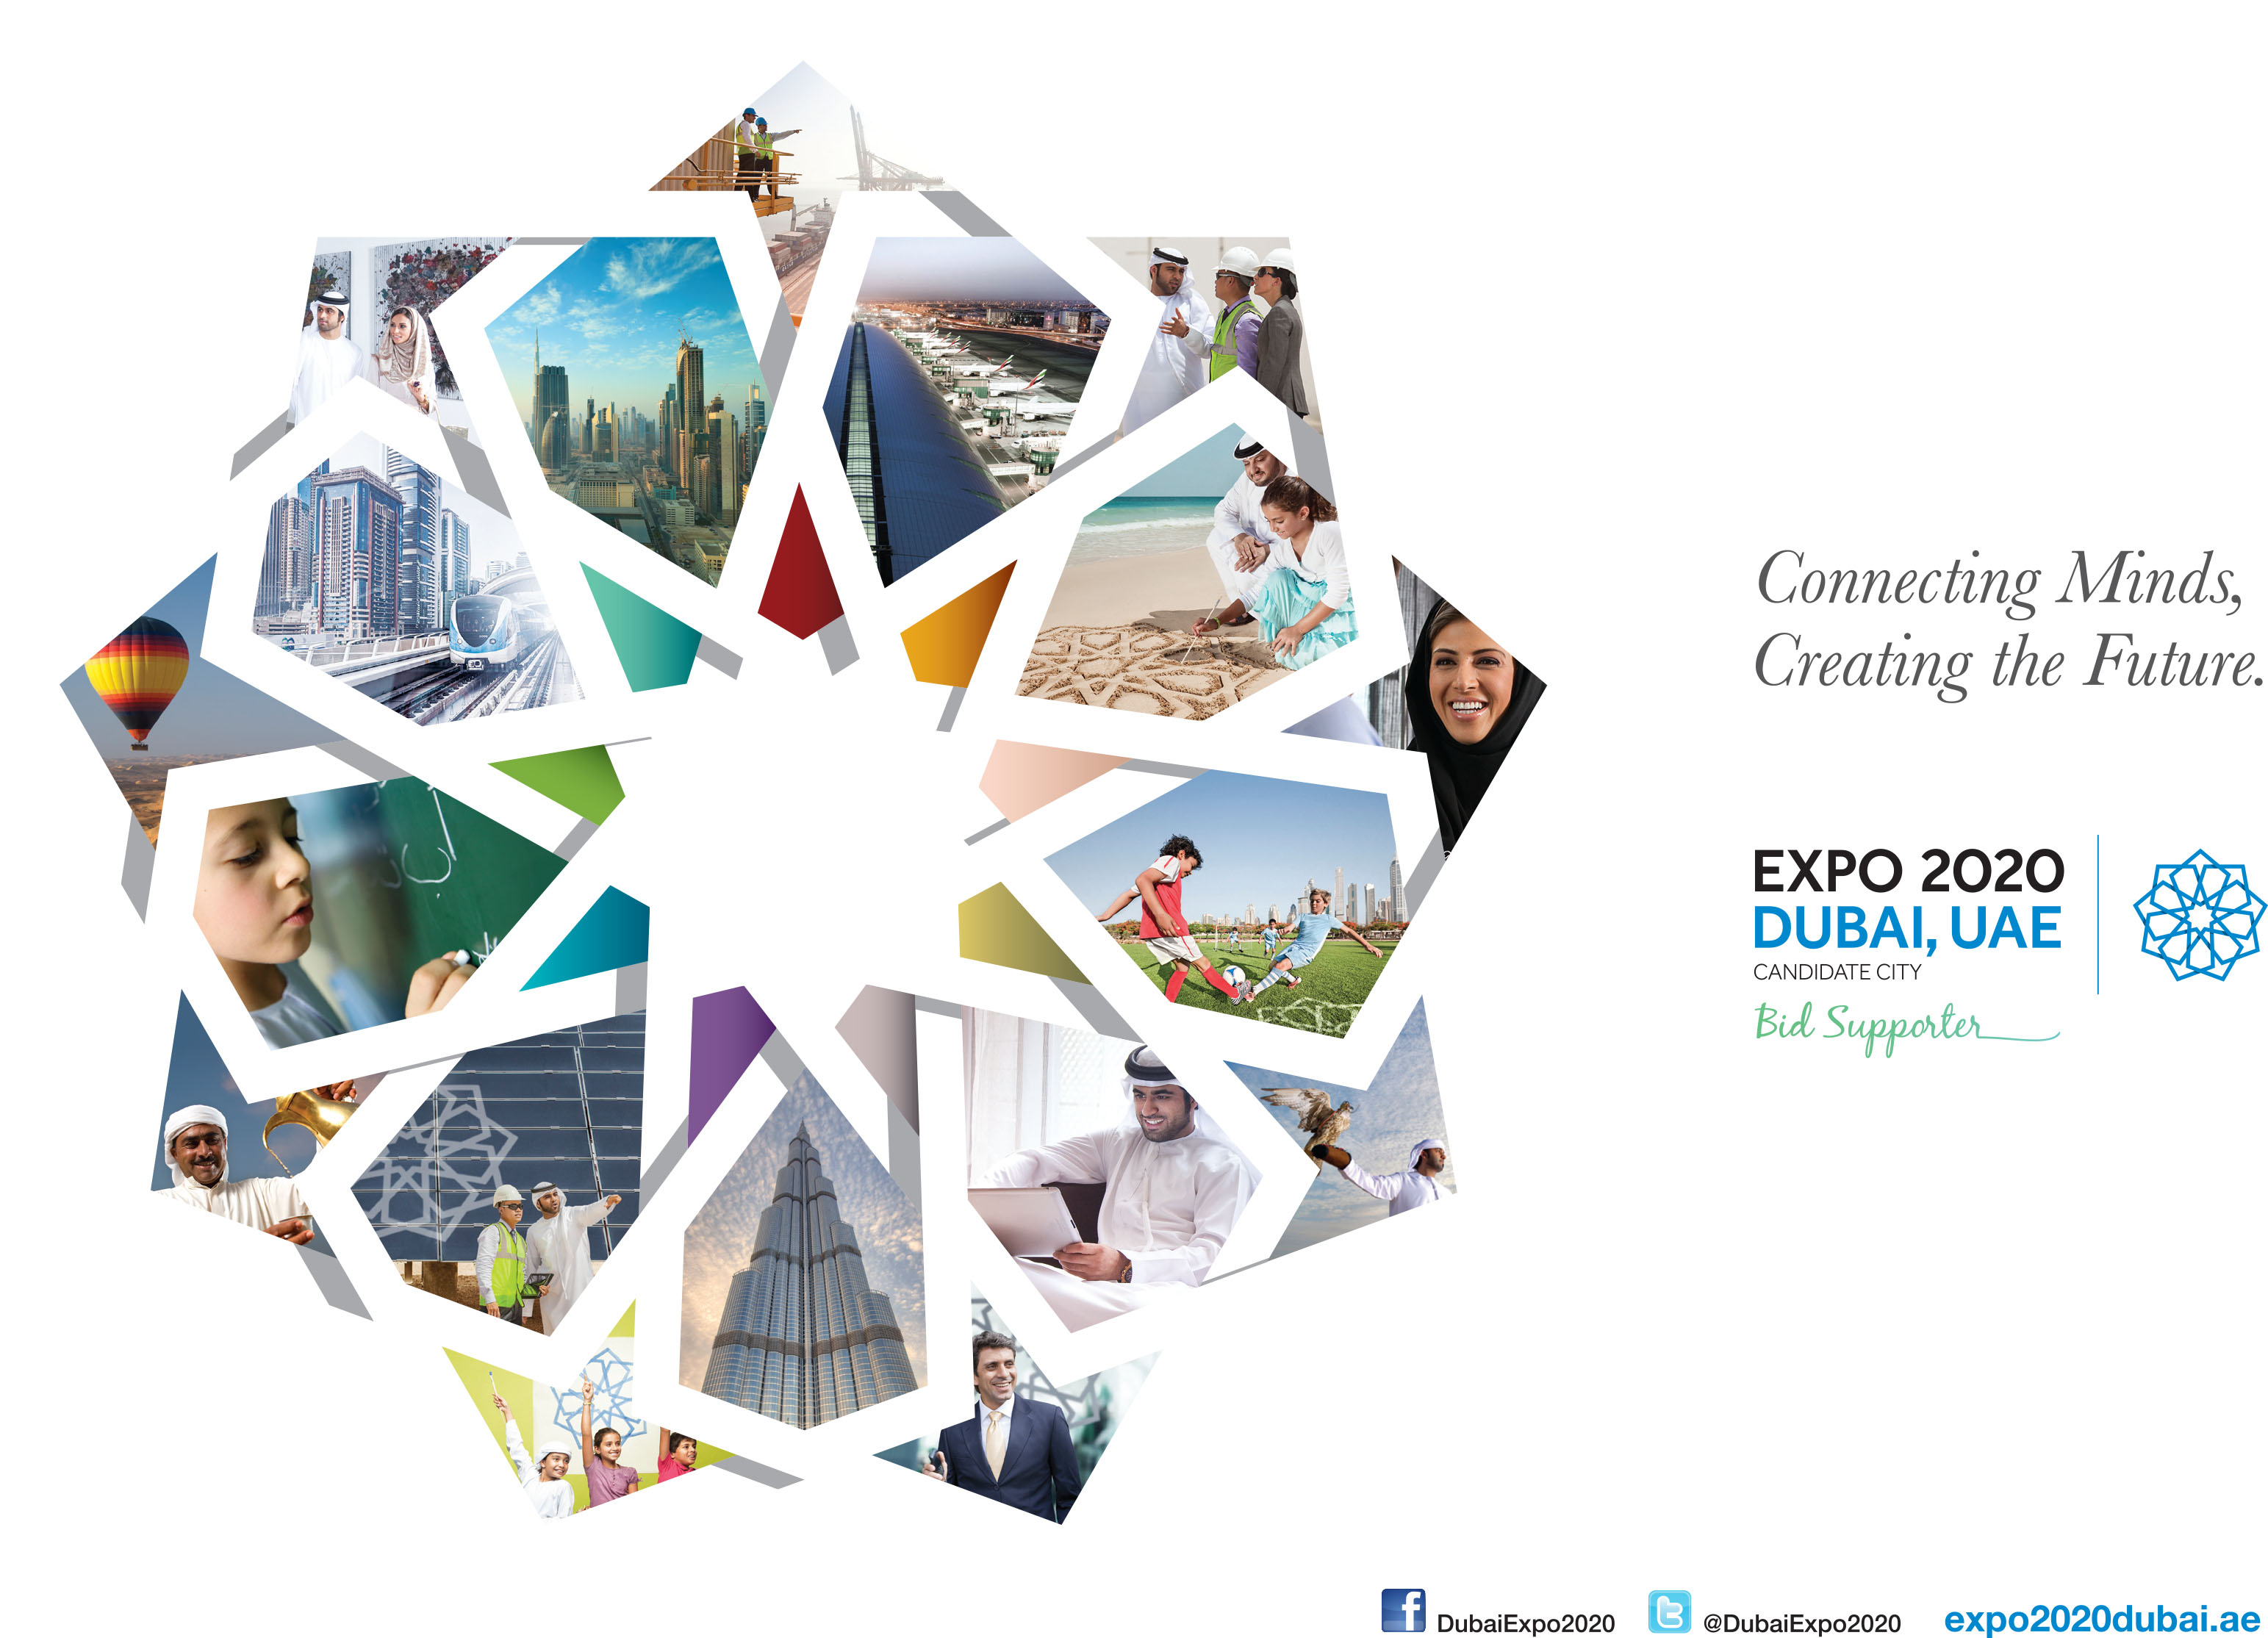 Time of announcement of dubai expo 2020